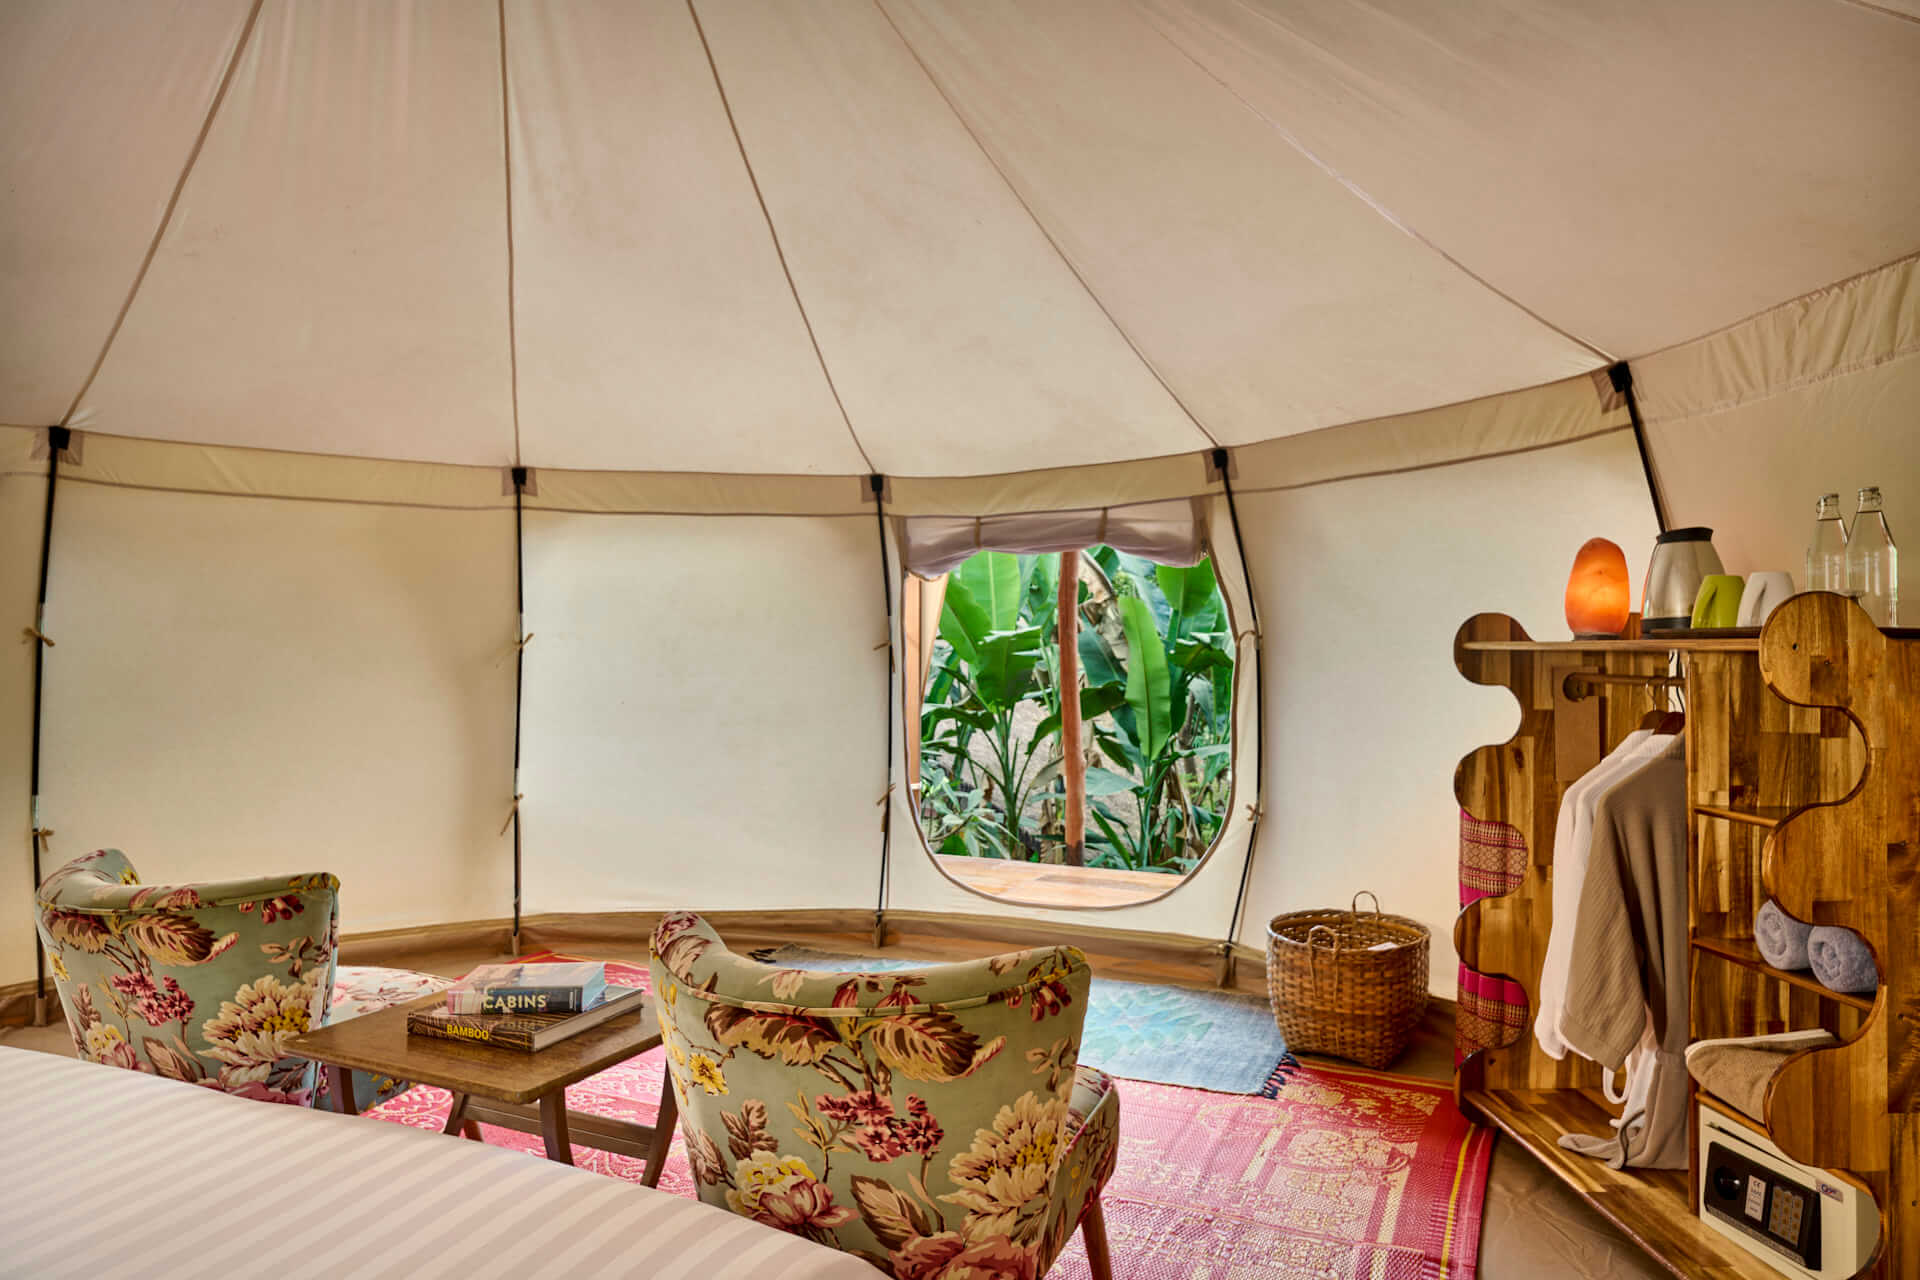 A teepee tent with a bed, chairs, and a window in Luang Prabang.